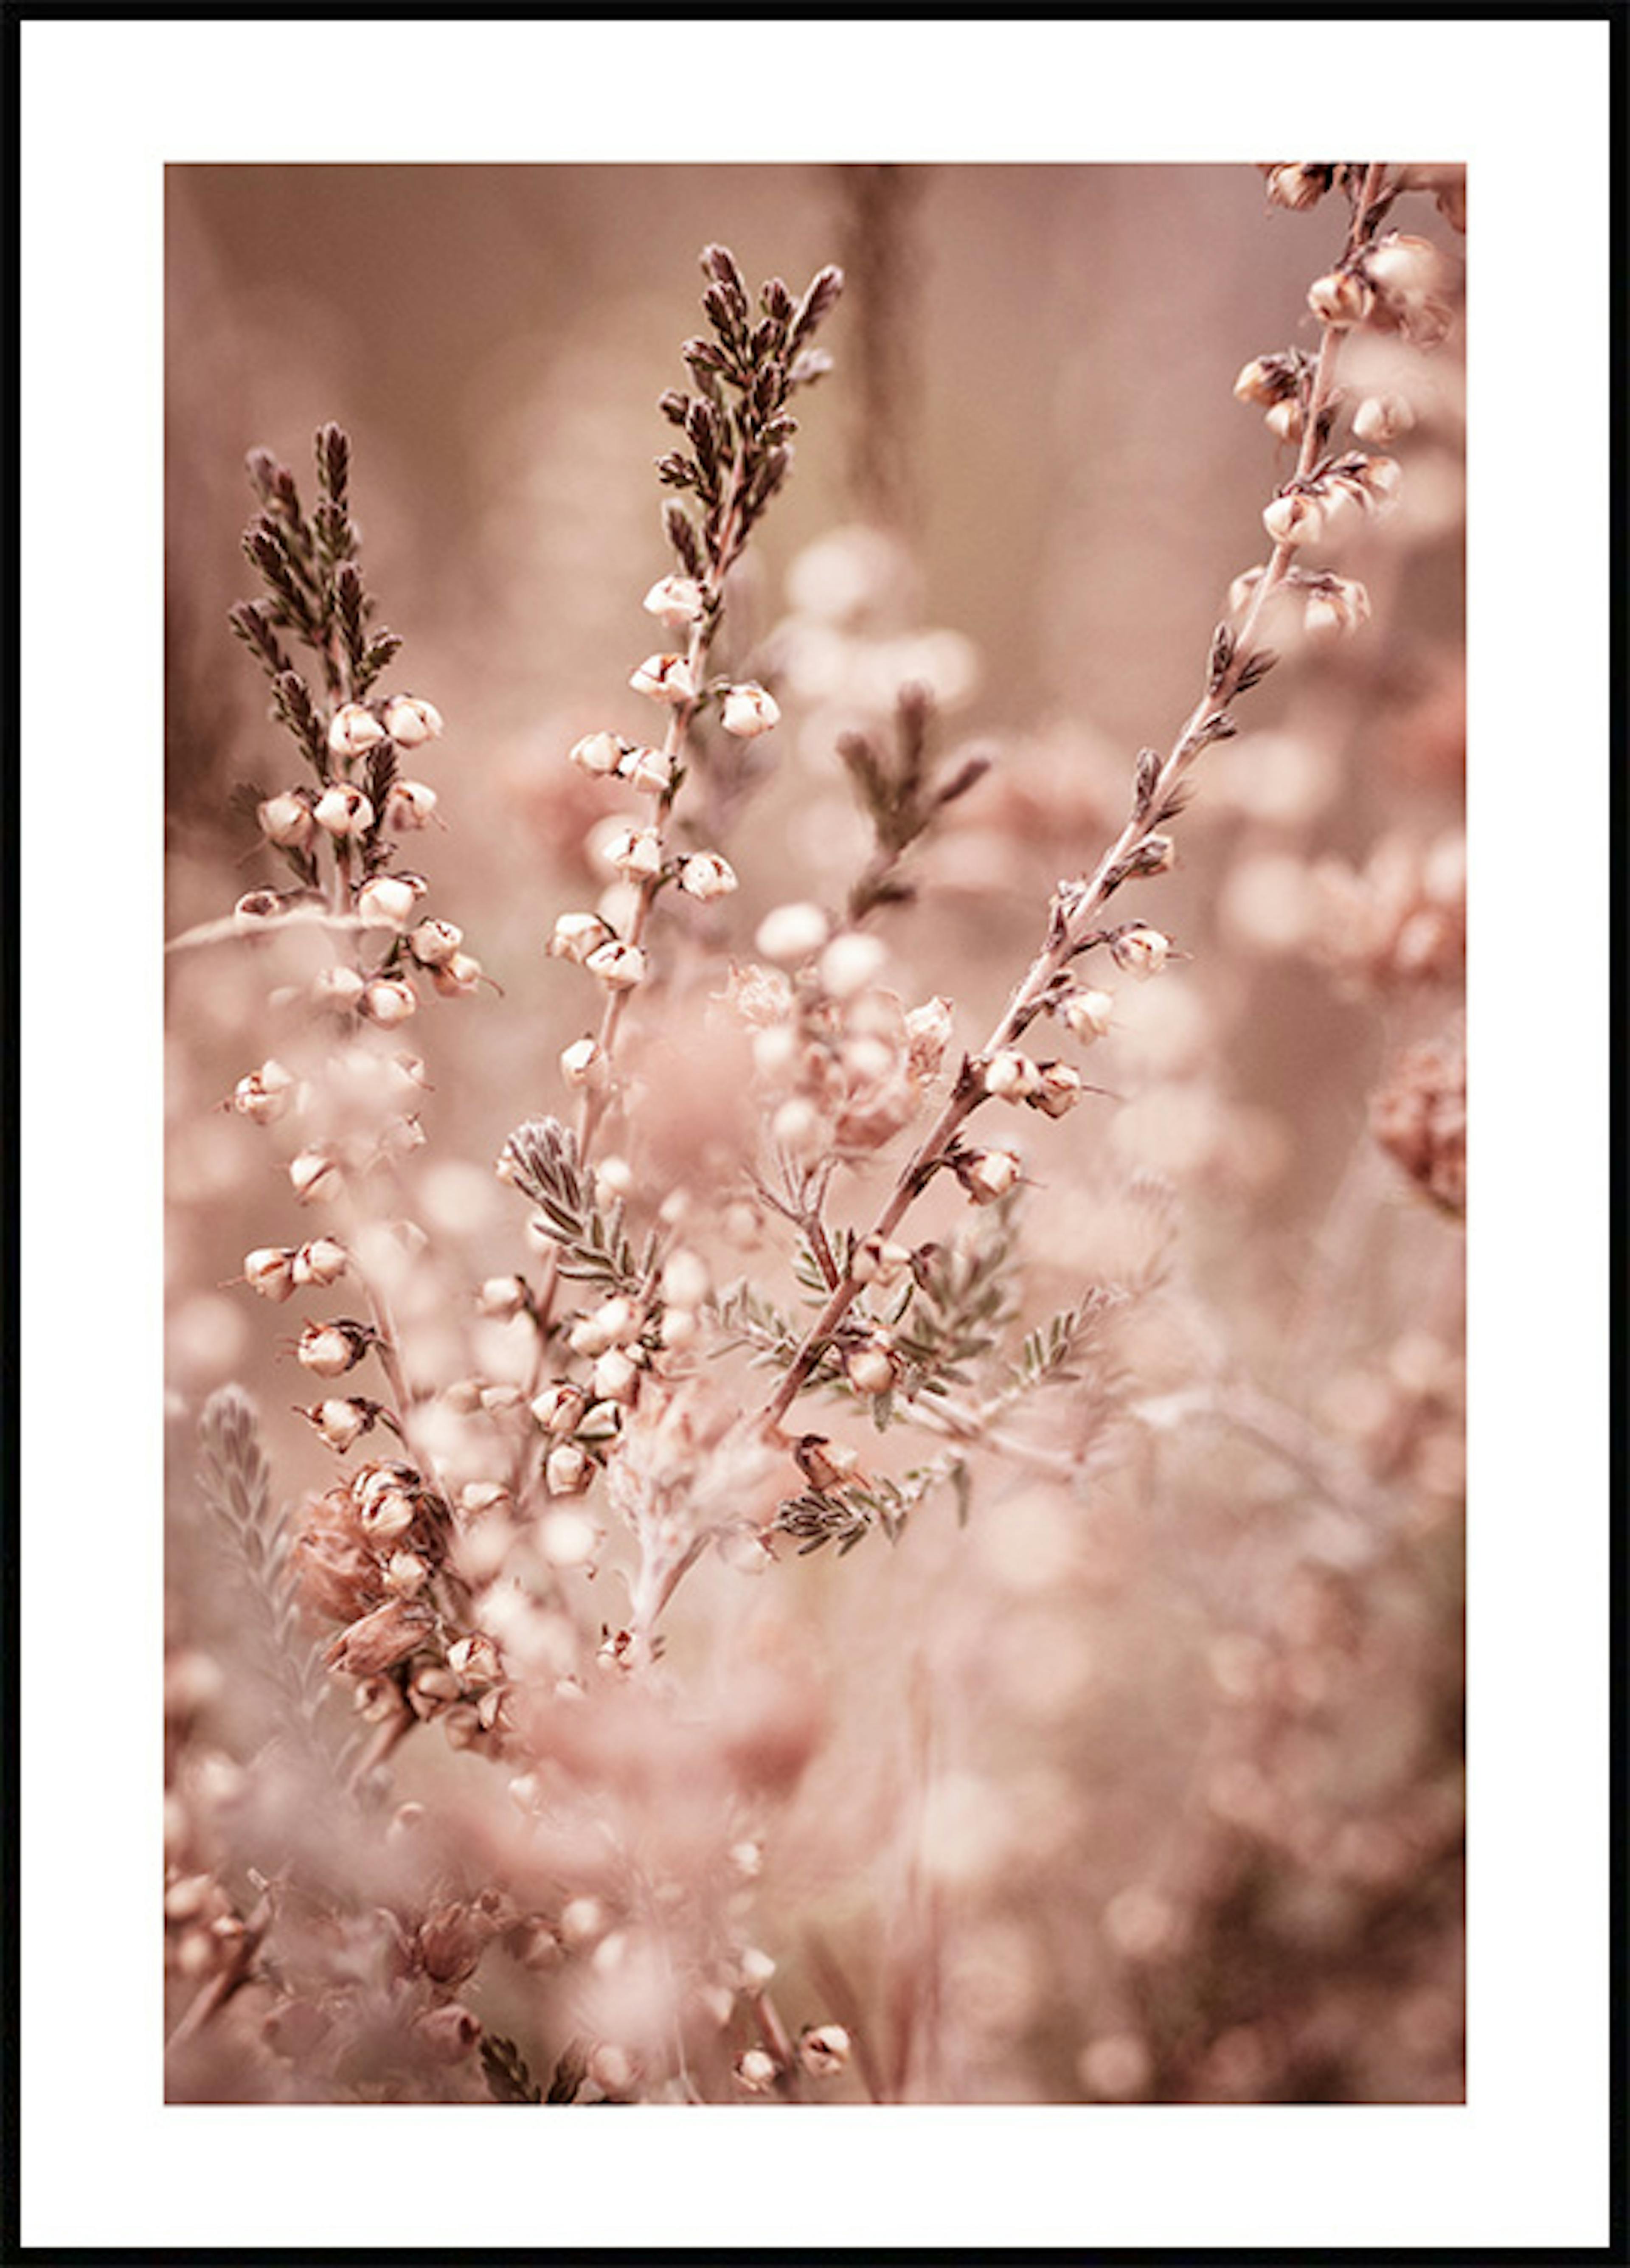 Heather Flowers Poster 0